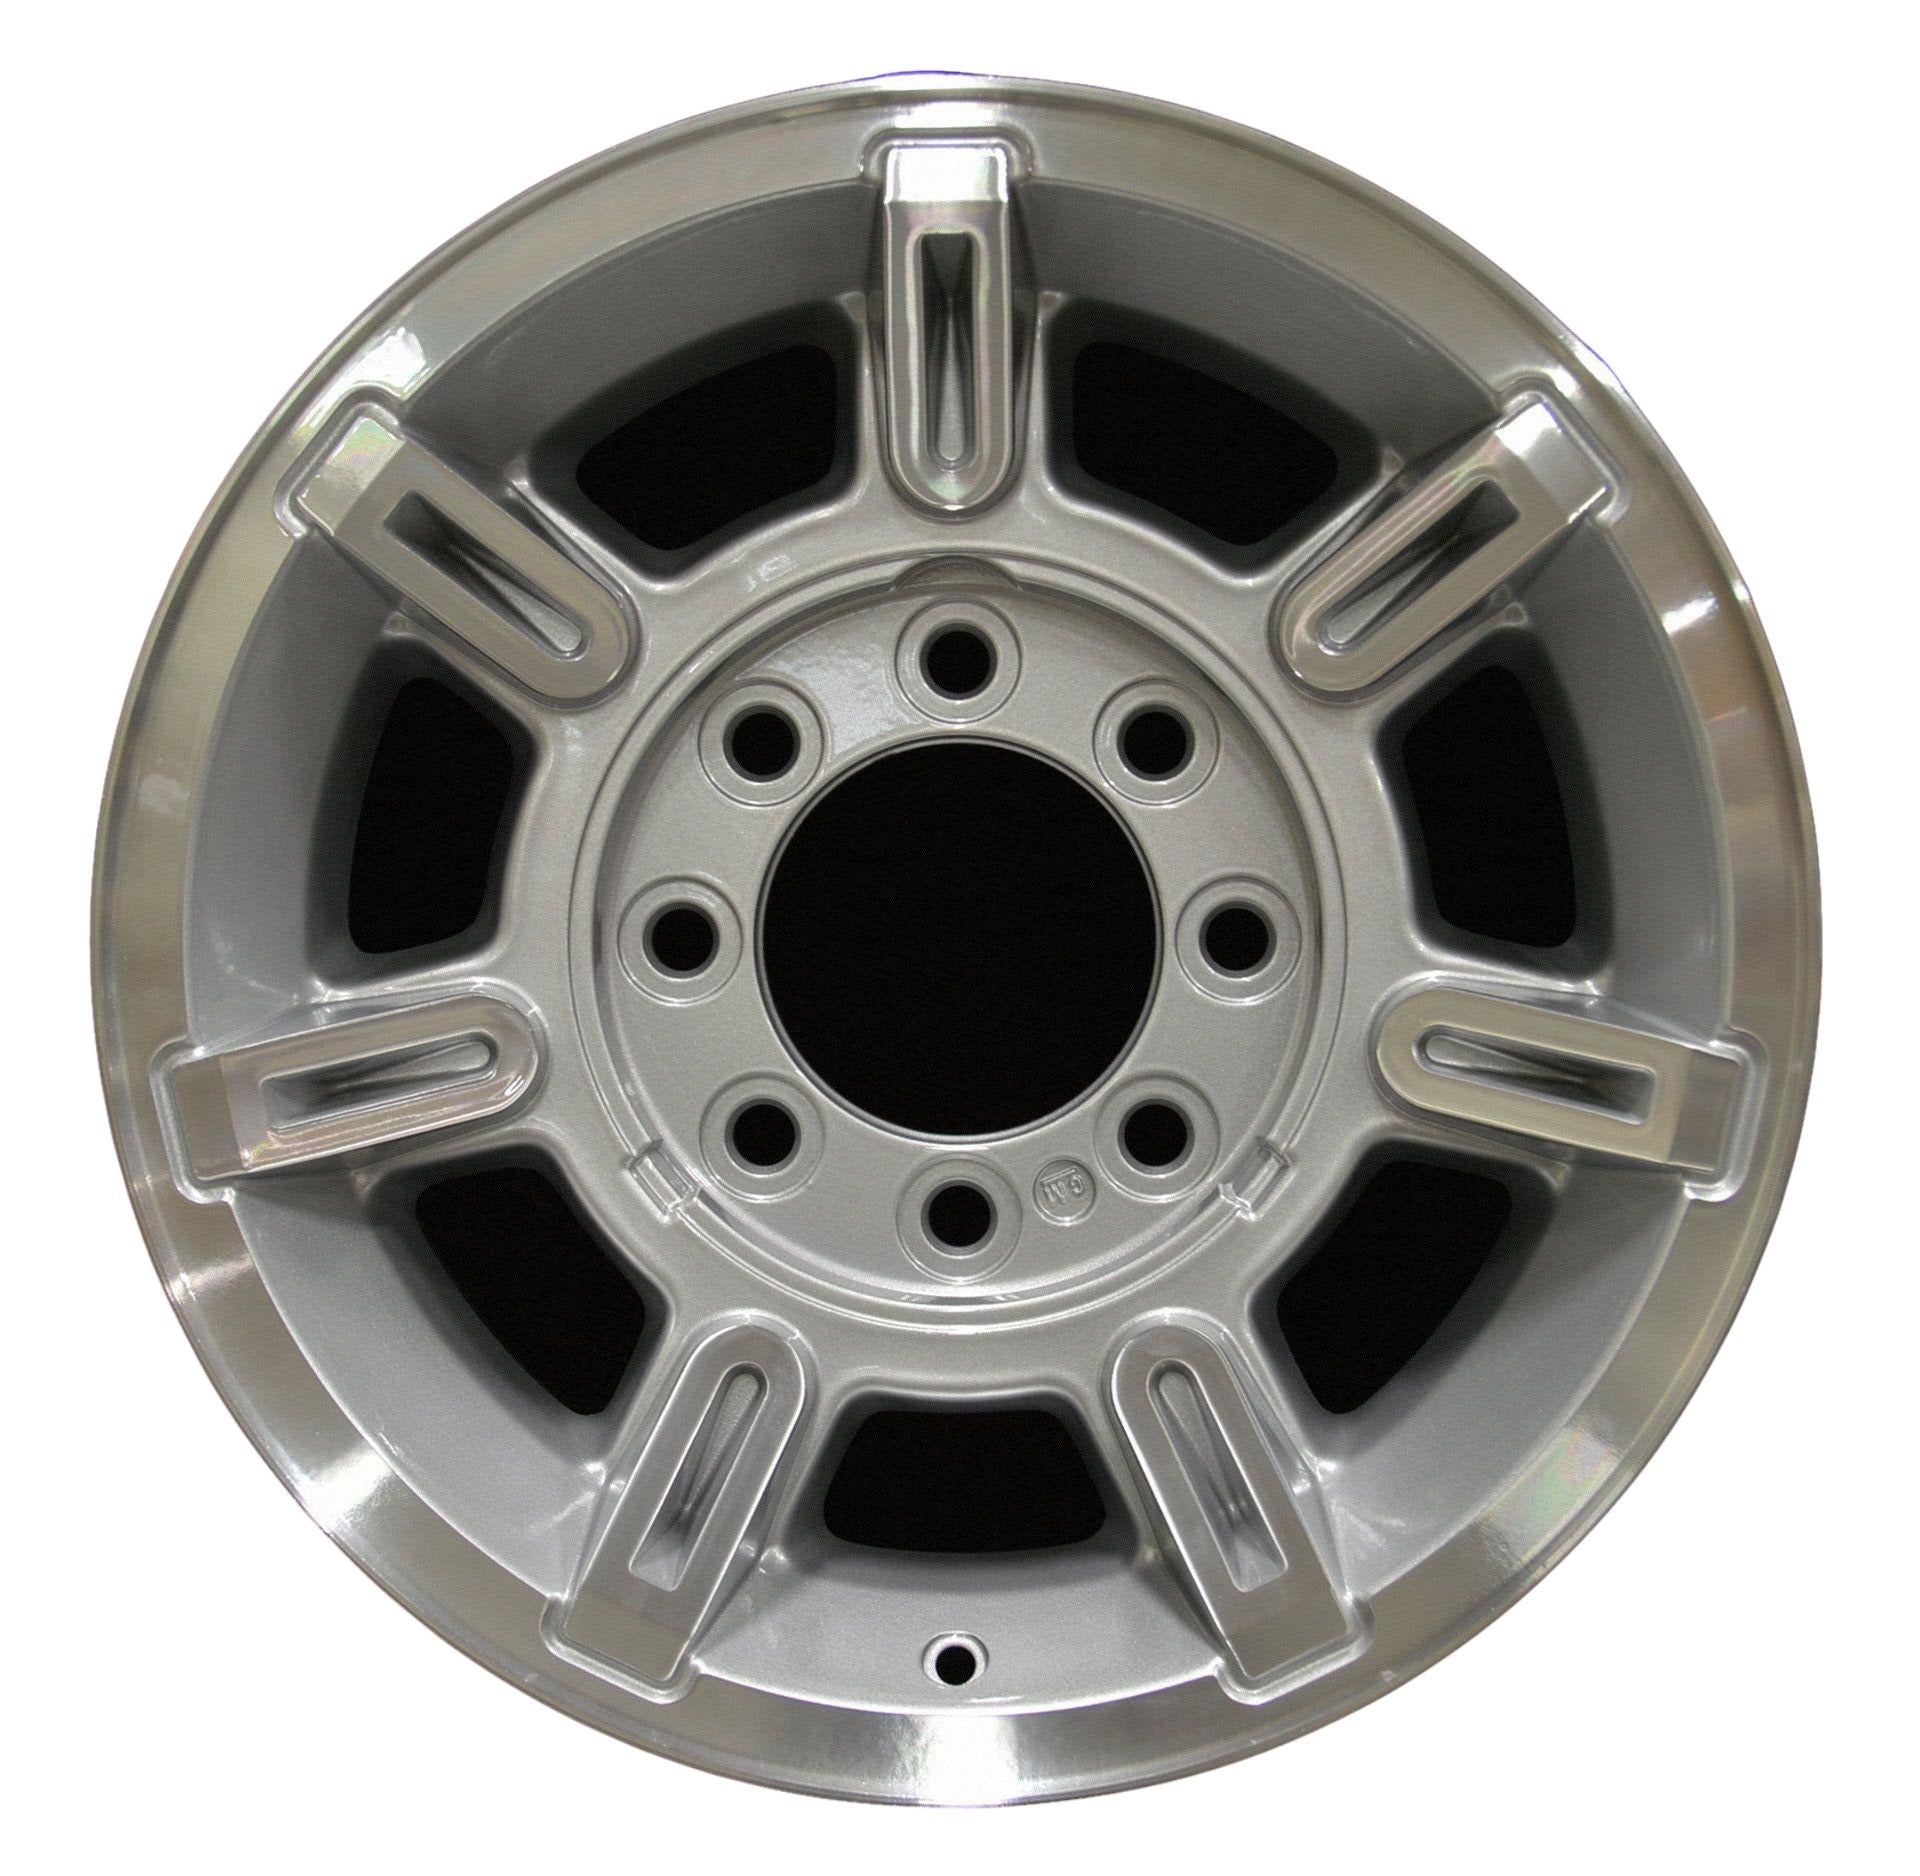 Hummer H2  2002, 2003, 2004, 2005, 2006, 2007 Factory OEM Car Wheel Size 17x8.5 Alloy WAO.6300.PS09.MA